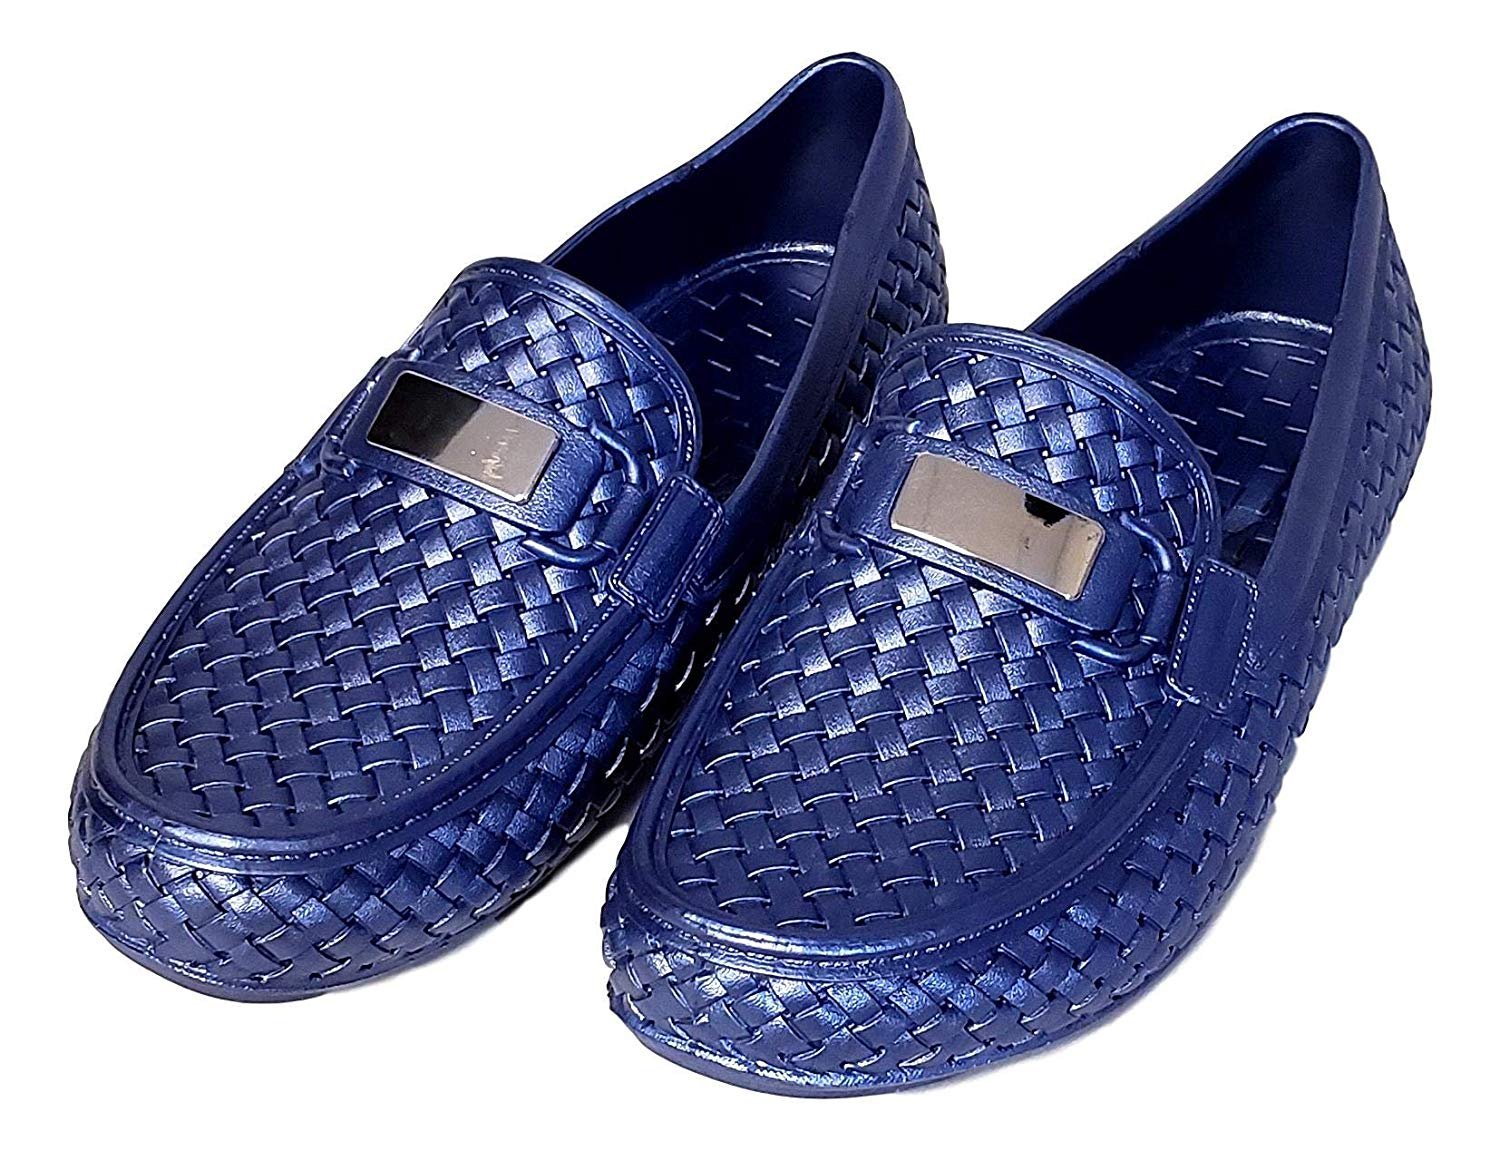 Mens Water Shoe Floater Loafers Classic Look Drivers 7 US M Mens, Blue - image 1 of 7